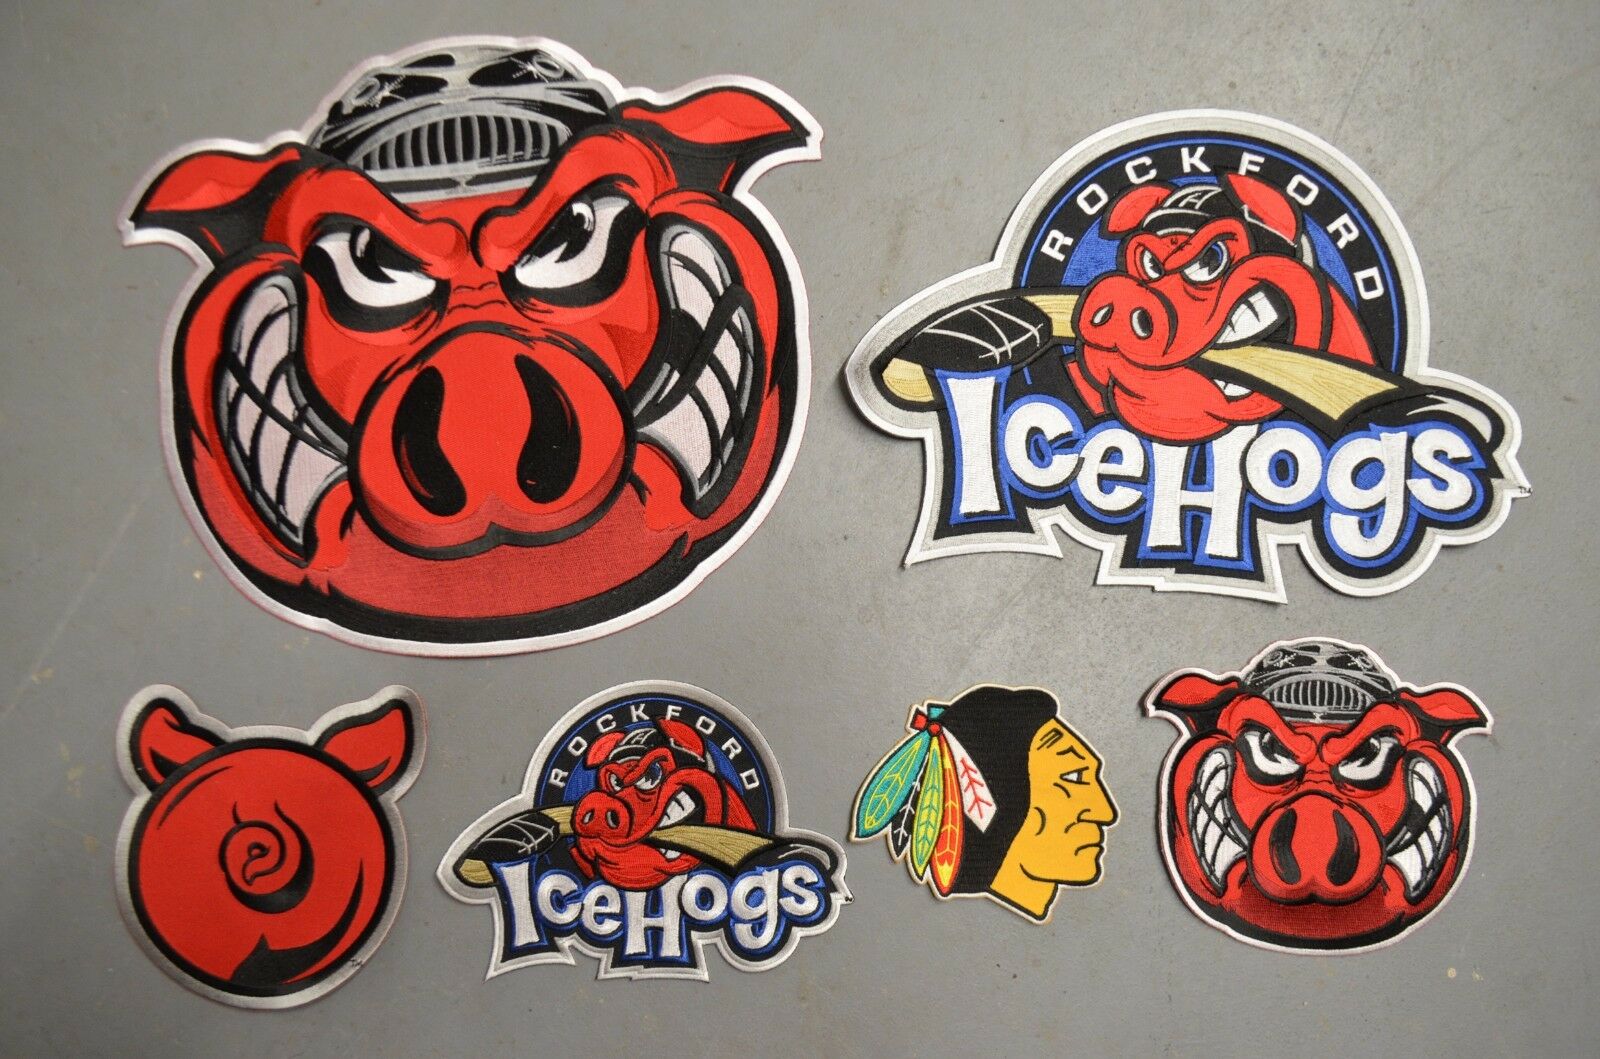 Choice Of: Rockford Icehogs Ahl Ihl Throwback Hockey Jersey Jacket Patch Crest